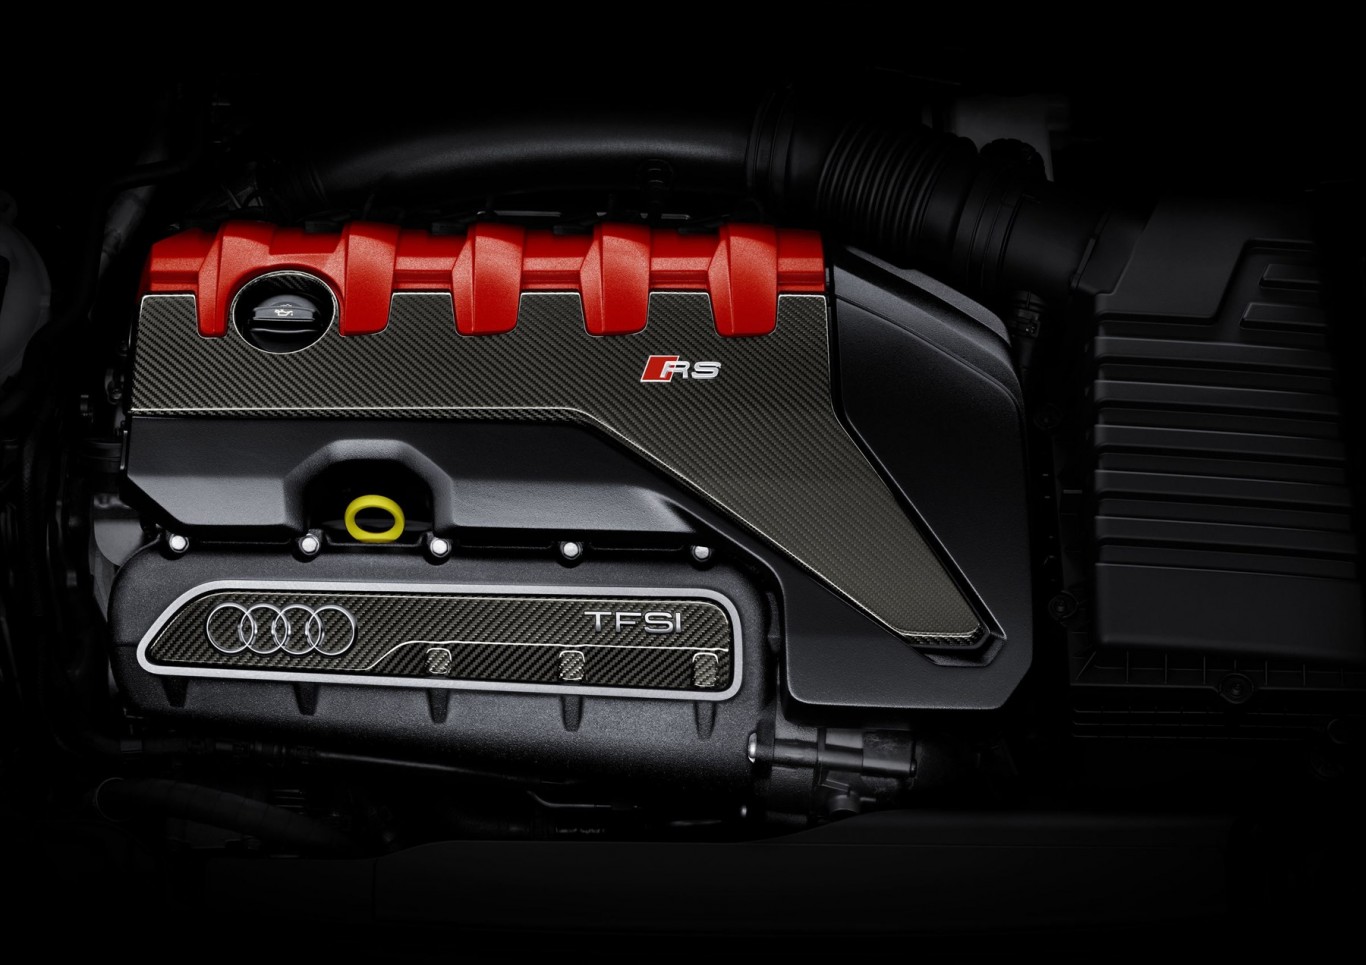 Ninth victory in a row: Audi 2.5 TFSI engine named “Engine of the Year” once again